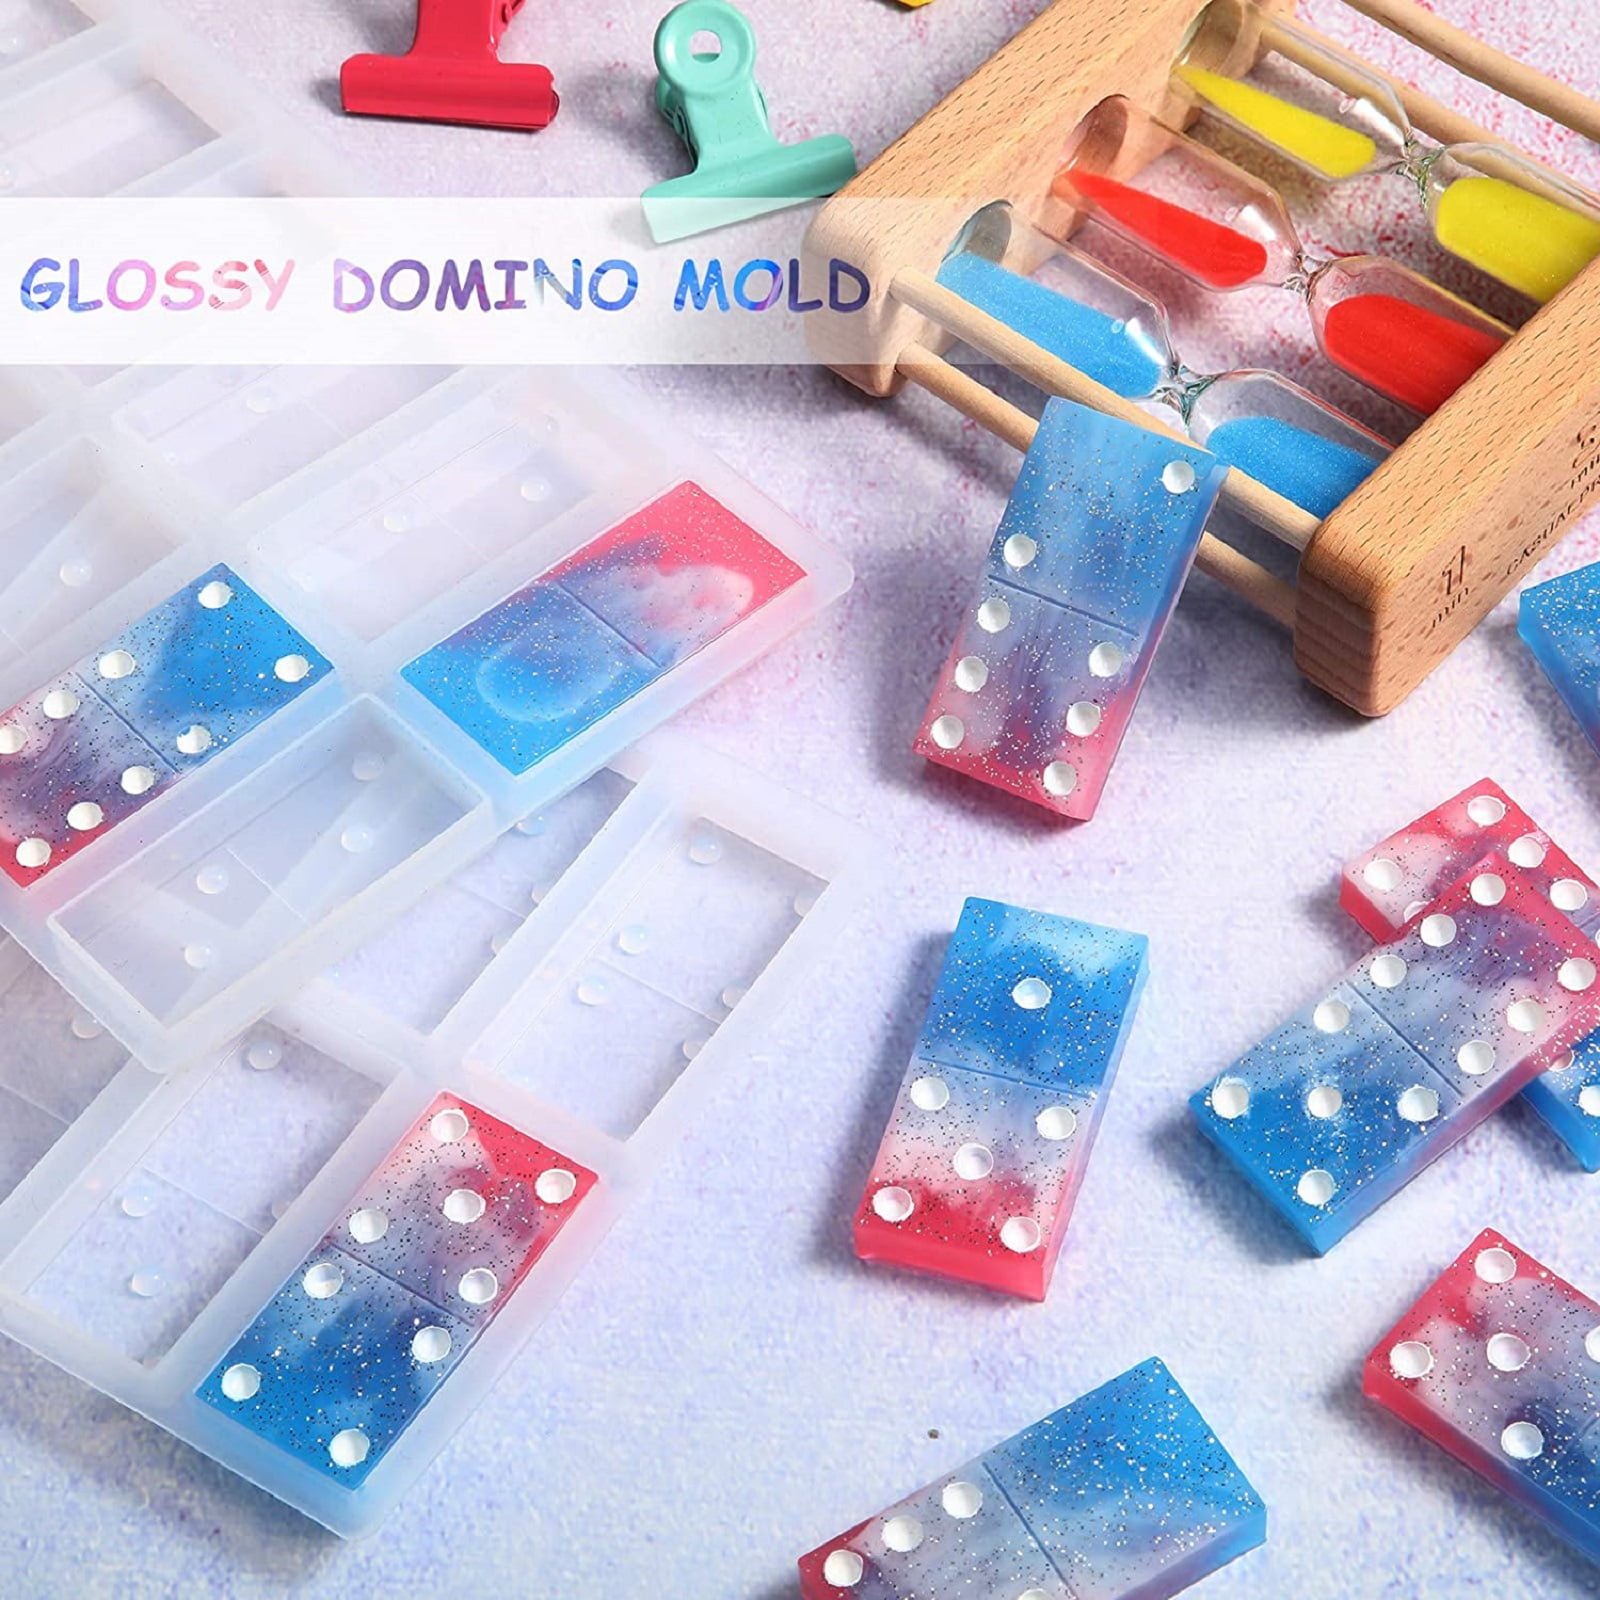  Domino Molds for Resin Casting-28 Cavities Dominoes Silicone  Molds for Epoxy Resin,UV Resin,Shiny & No Scratches & Durable Domino Resin  Mold : Arts, Crafts & Sewing